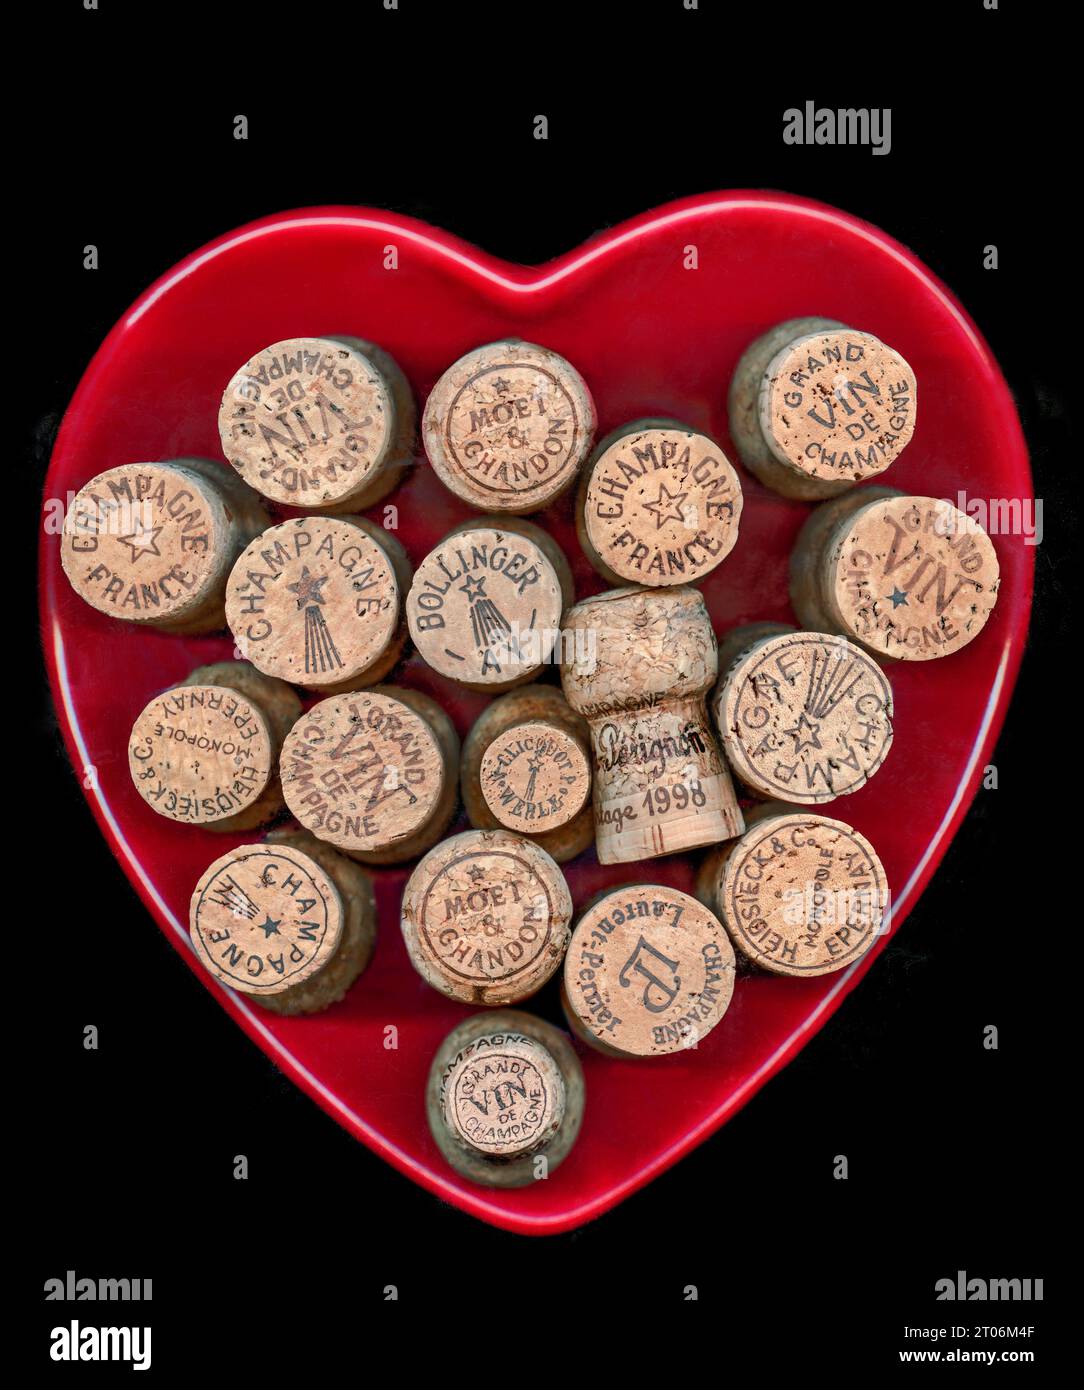 French fine champagne corks including Dom Perignon, Bollinger, Heidsieck ,Veuve Clicquot and Moet Chandon, in a heart shaped dish France Stock Photo